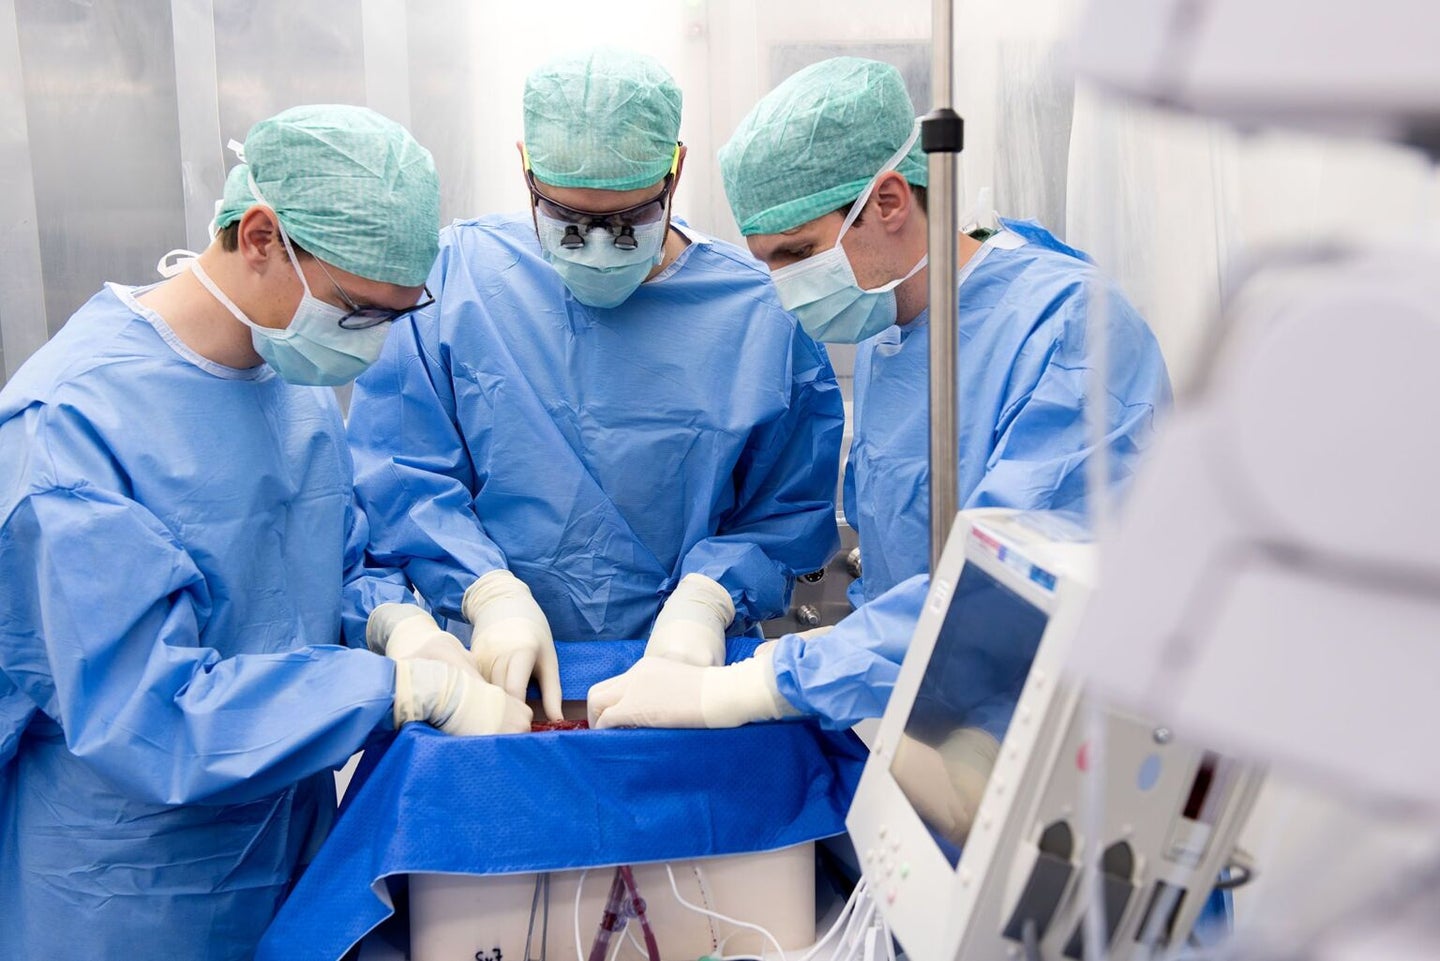 The Wyss Zurich Team connects the donor liver to the perfusion machine in the clean room.